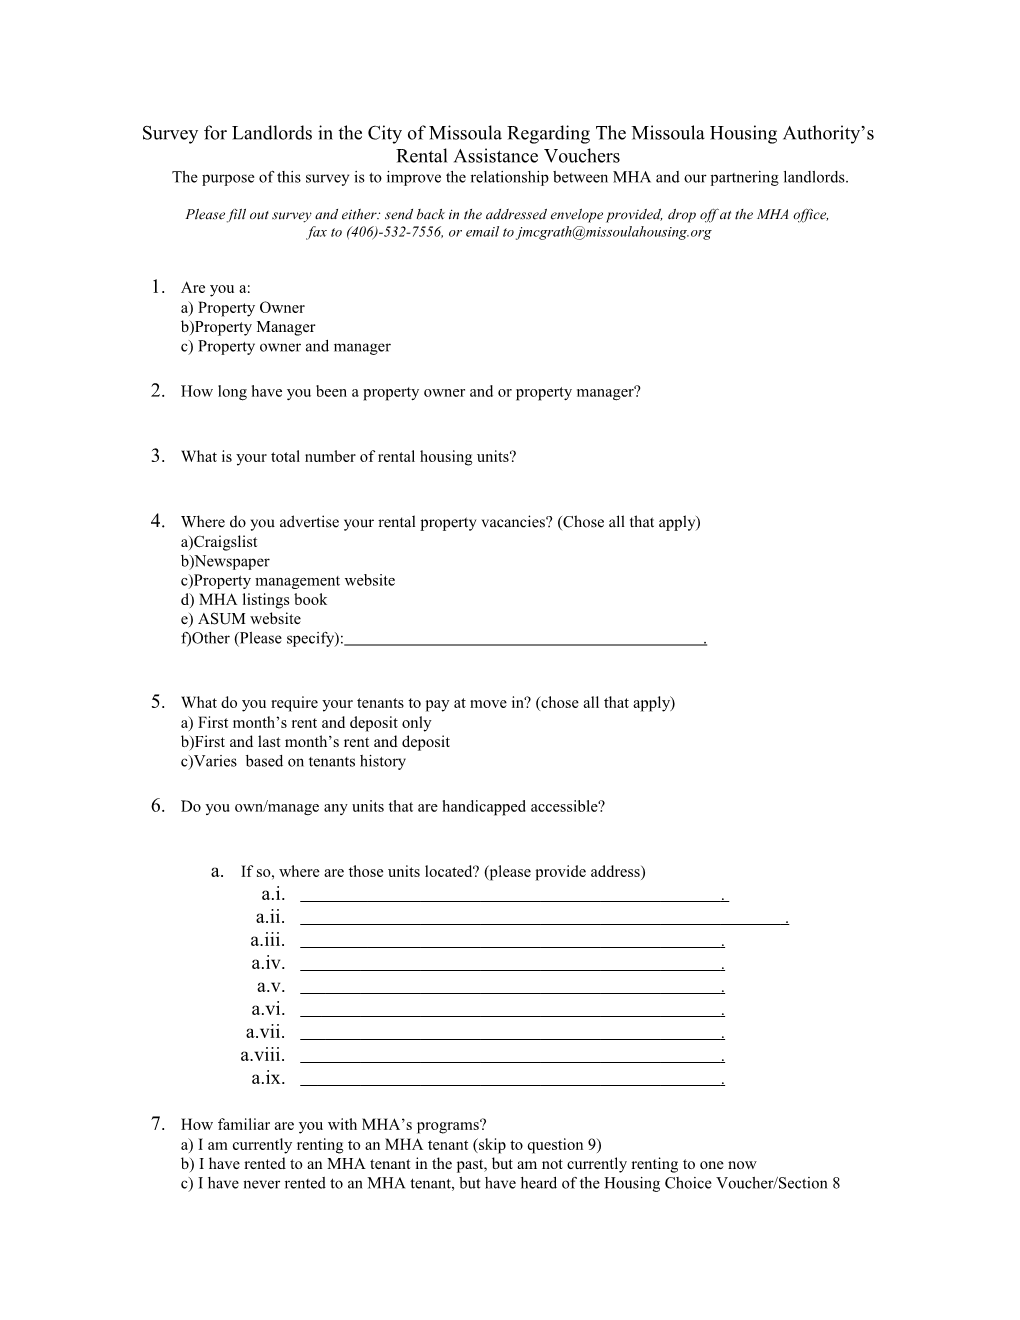 Survey for Landlords in the City of Missoula Regarding the Missoula Housing Authority S